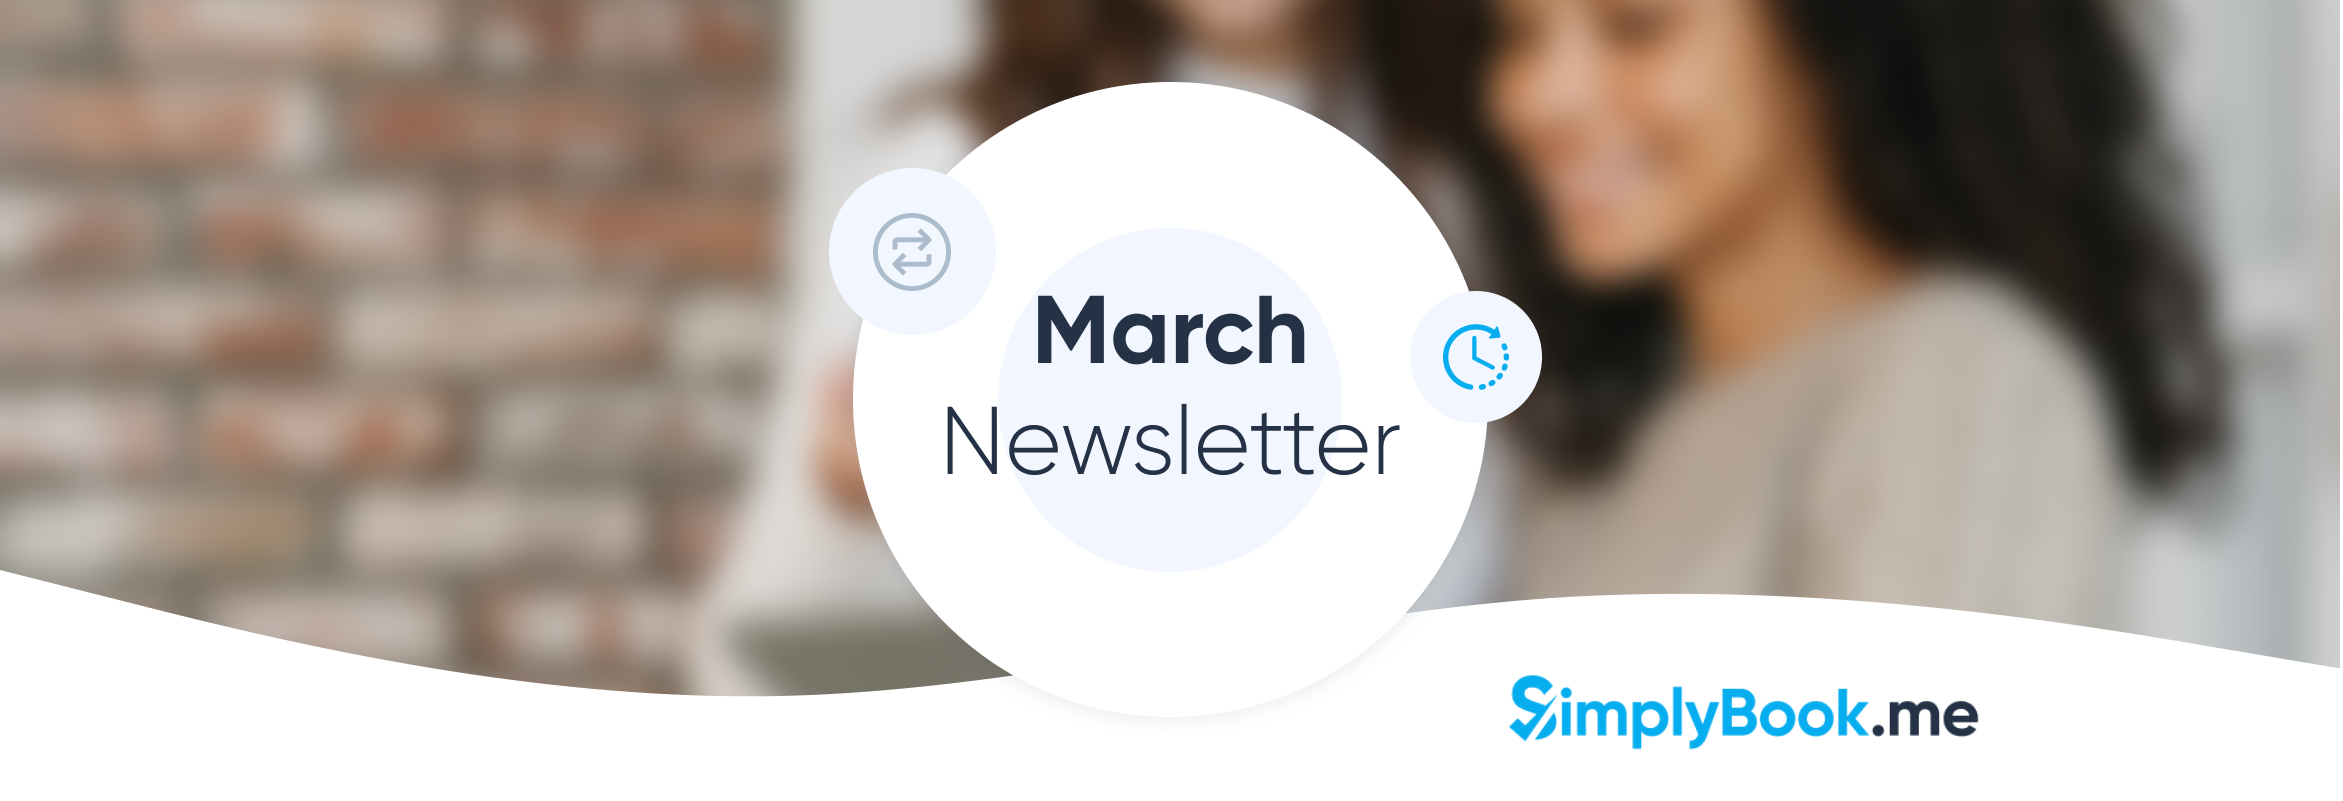 March Newsletter Simplybook.me developments